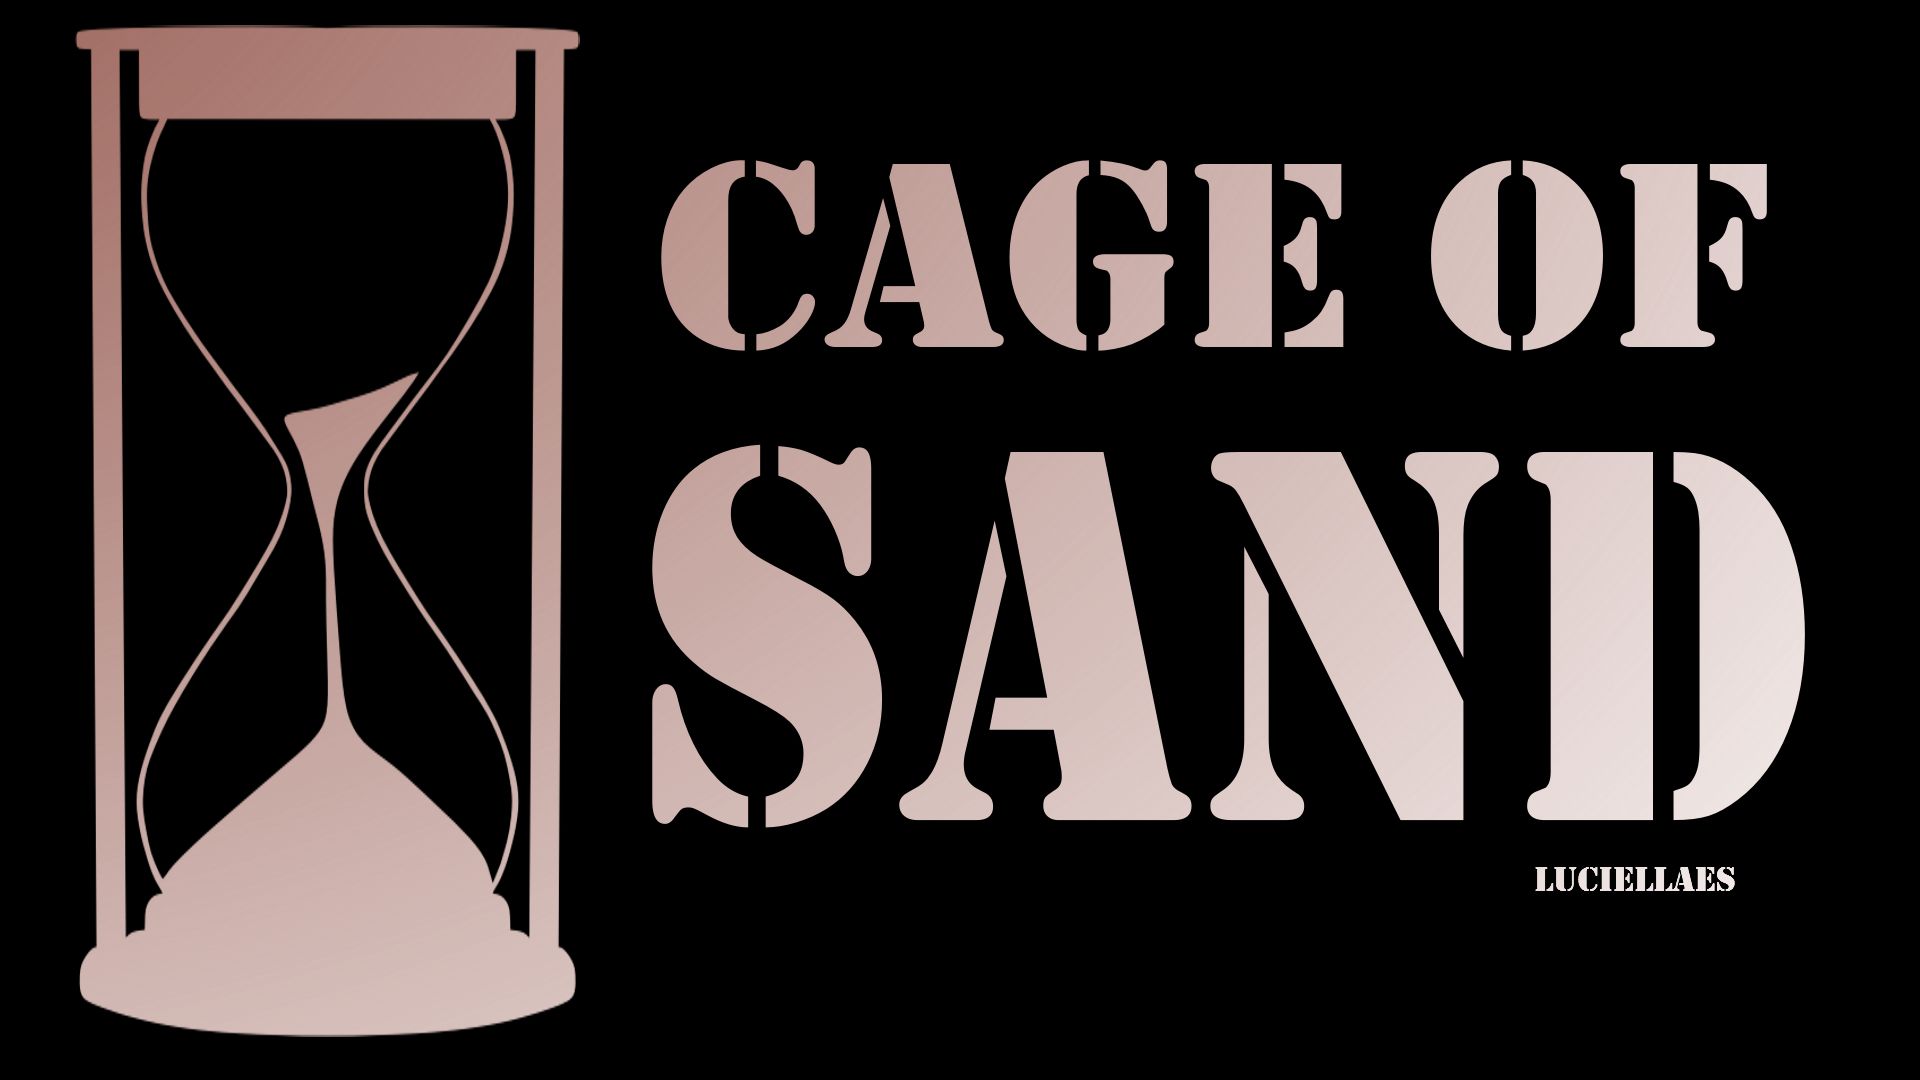 Cage of Sand